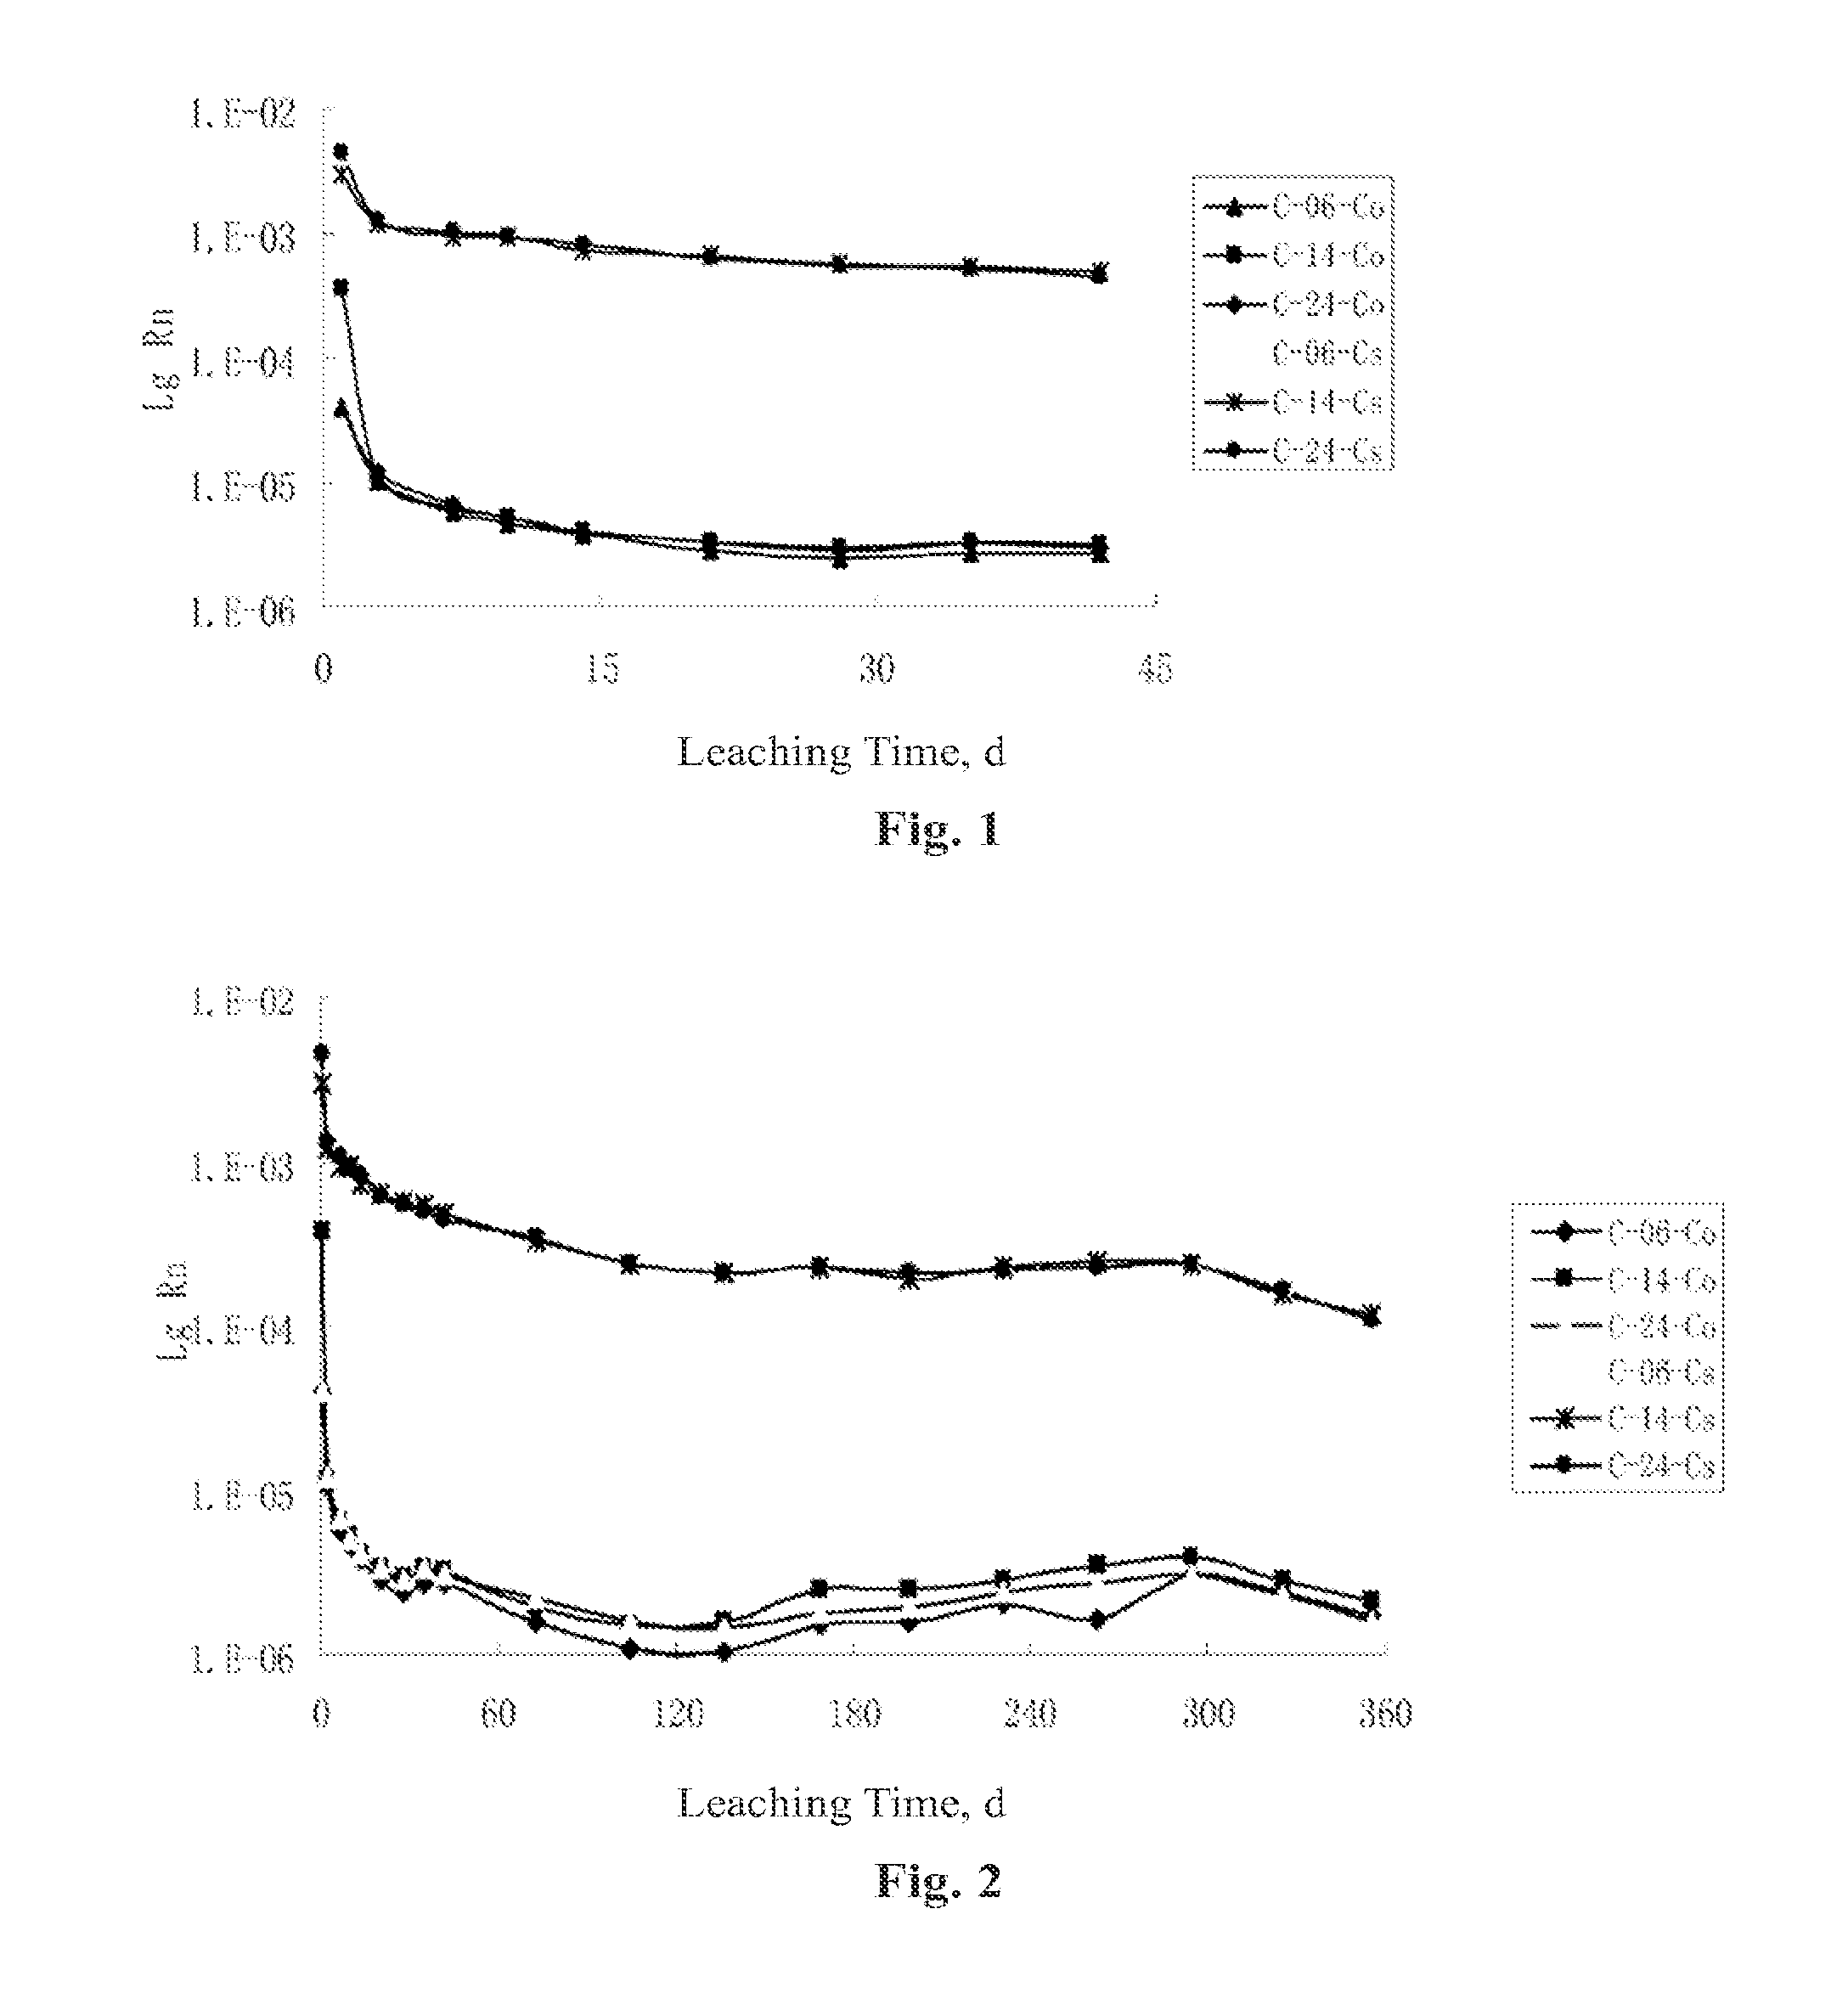 Cement curing formulation and method for high-level radioactive boron waste resins from nuclear reactor